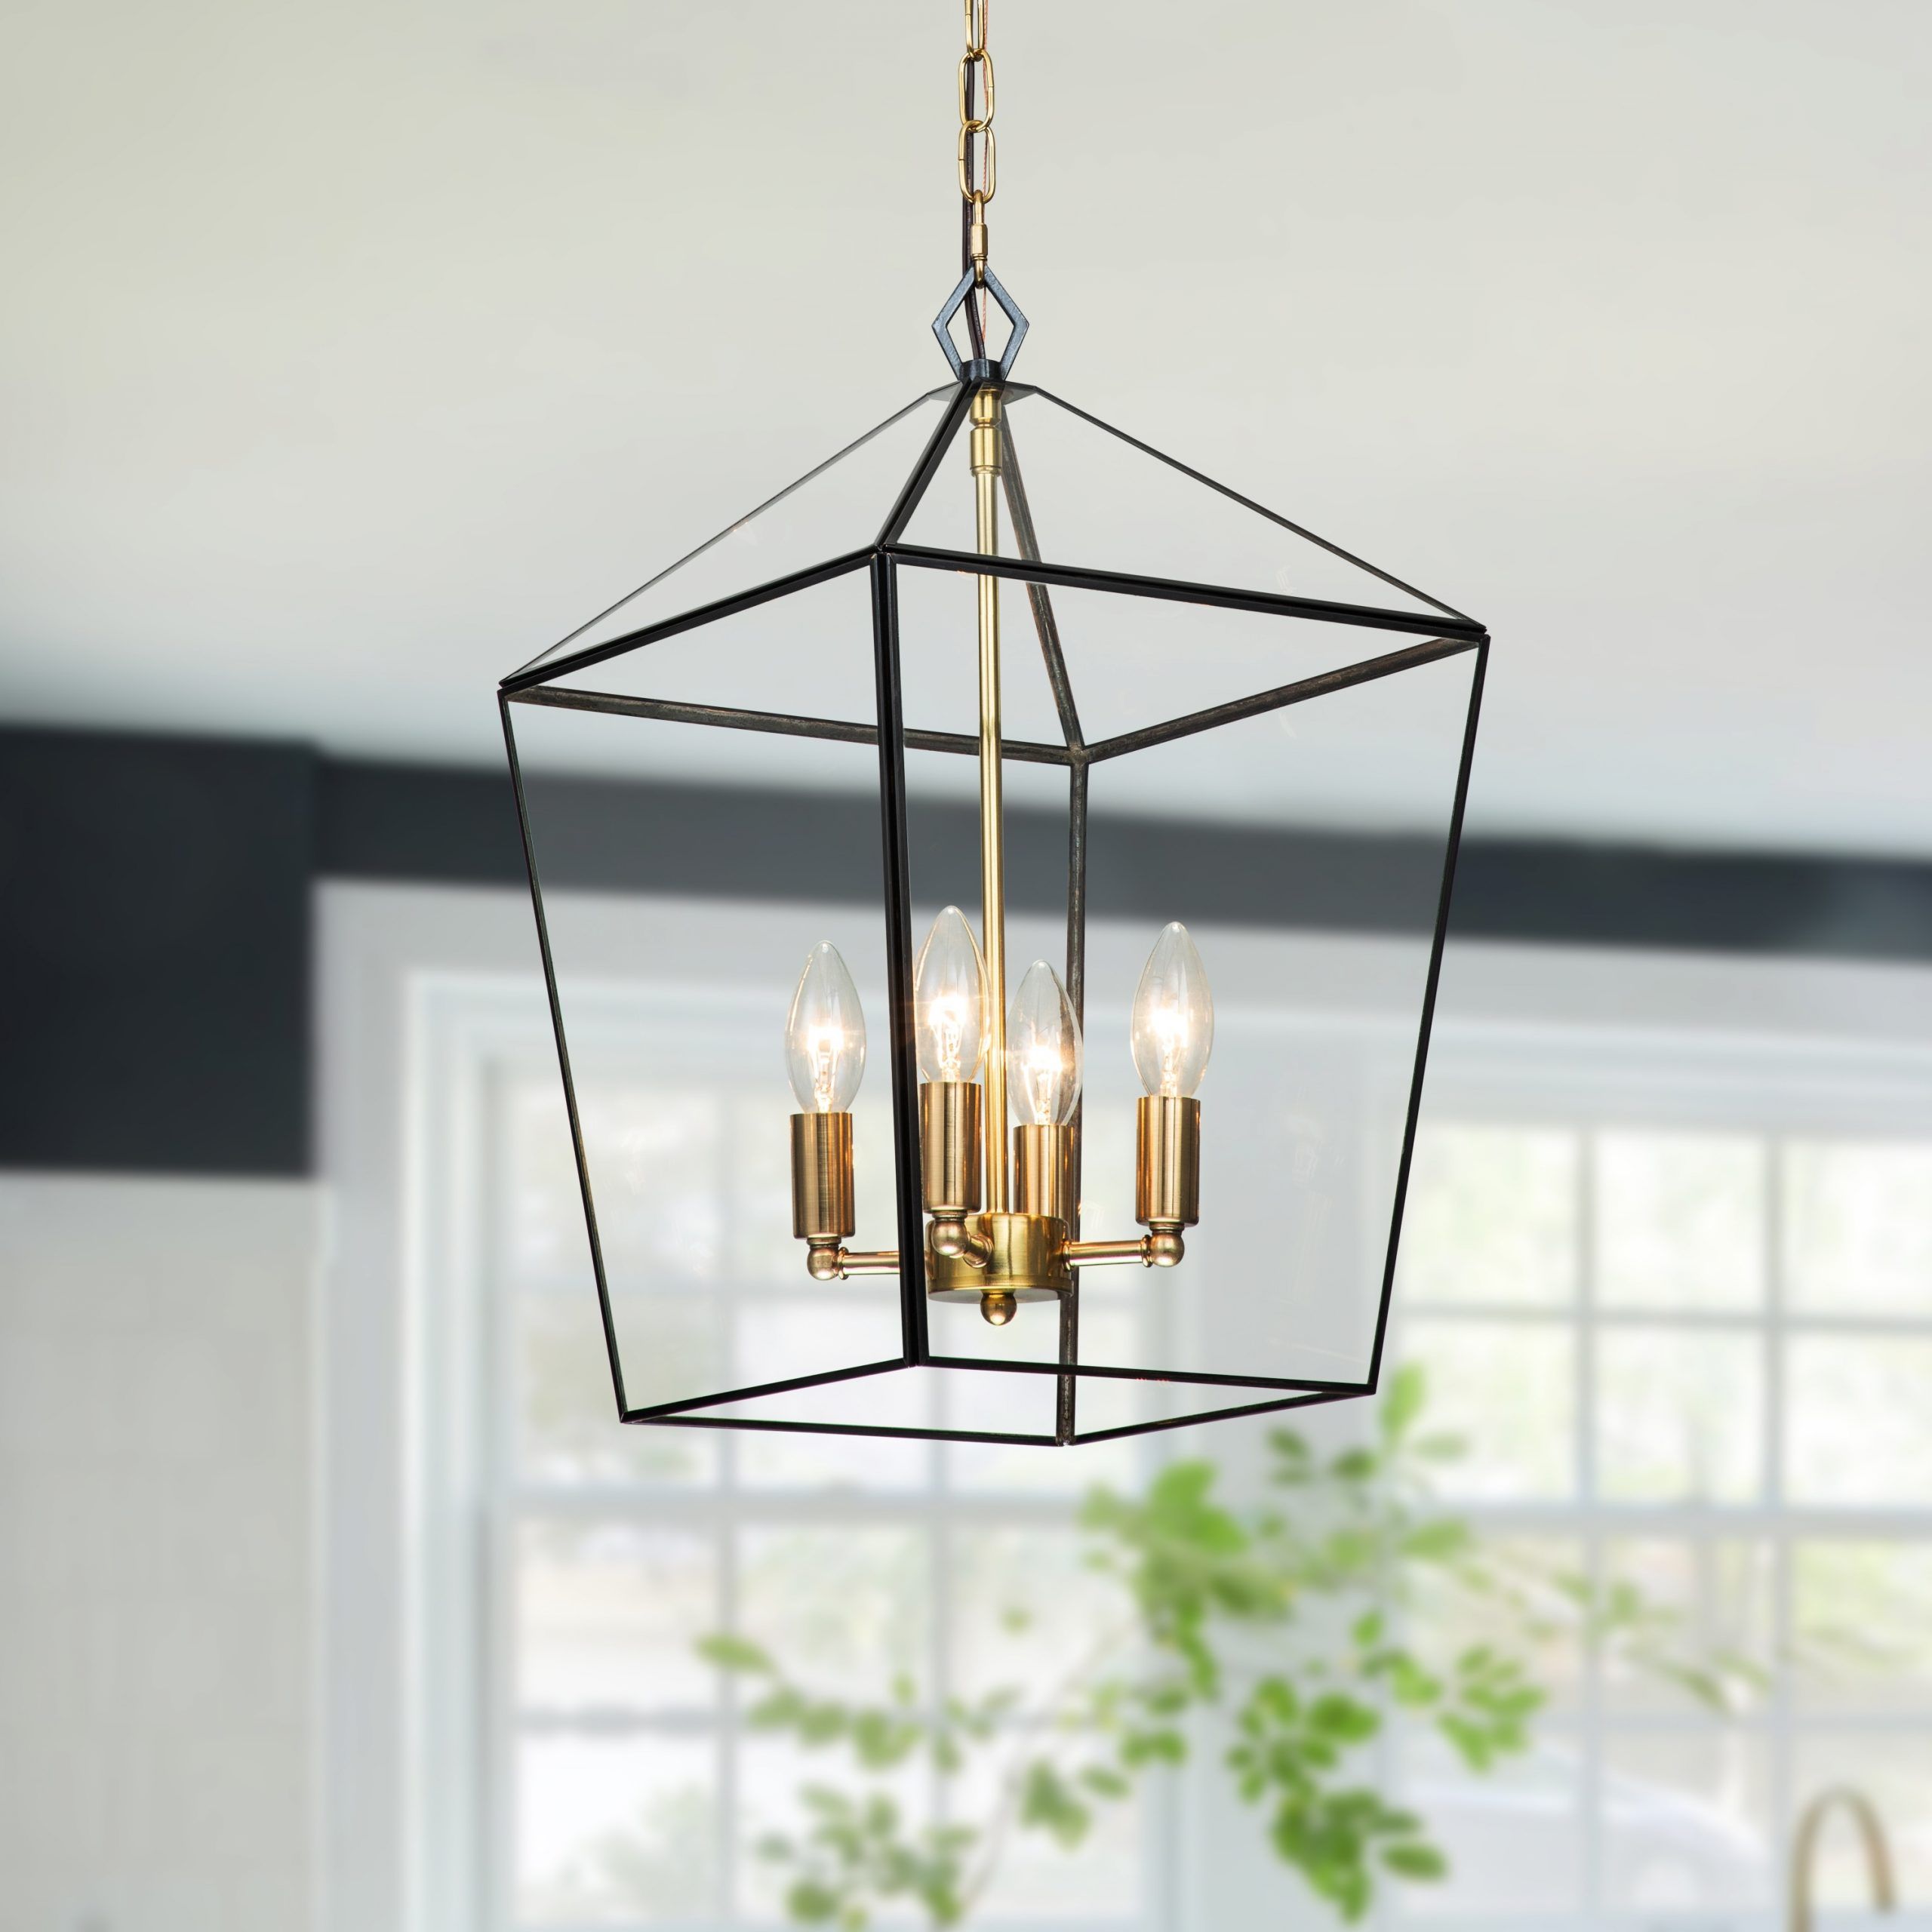 2020 Warm Brass Lantern Chandeliers For 4 Light Brass Lantern Pendant With Clear Tempered Glass Panes – W12" X E12"  X H (View 7 of 15)